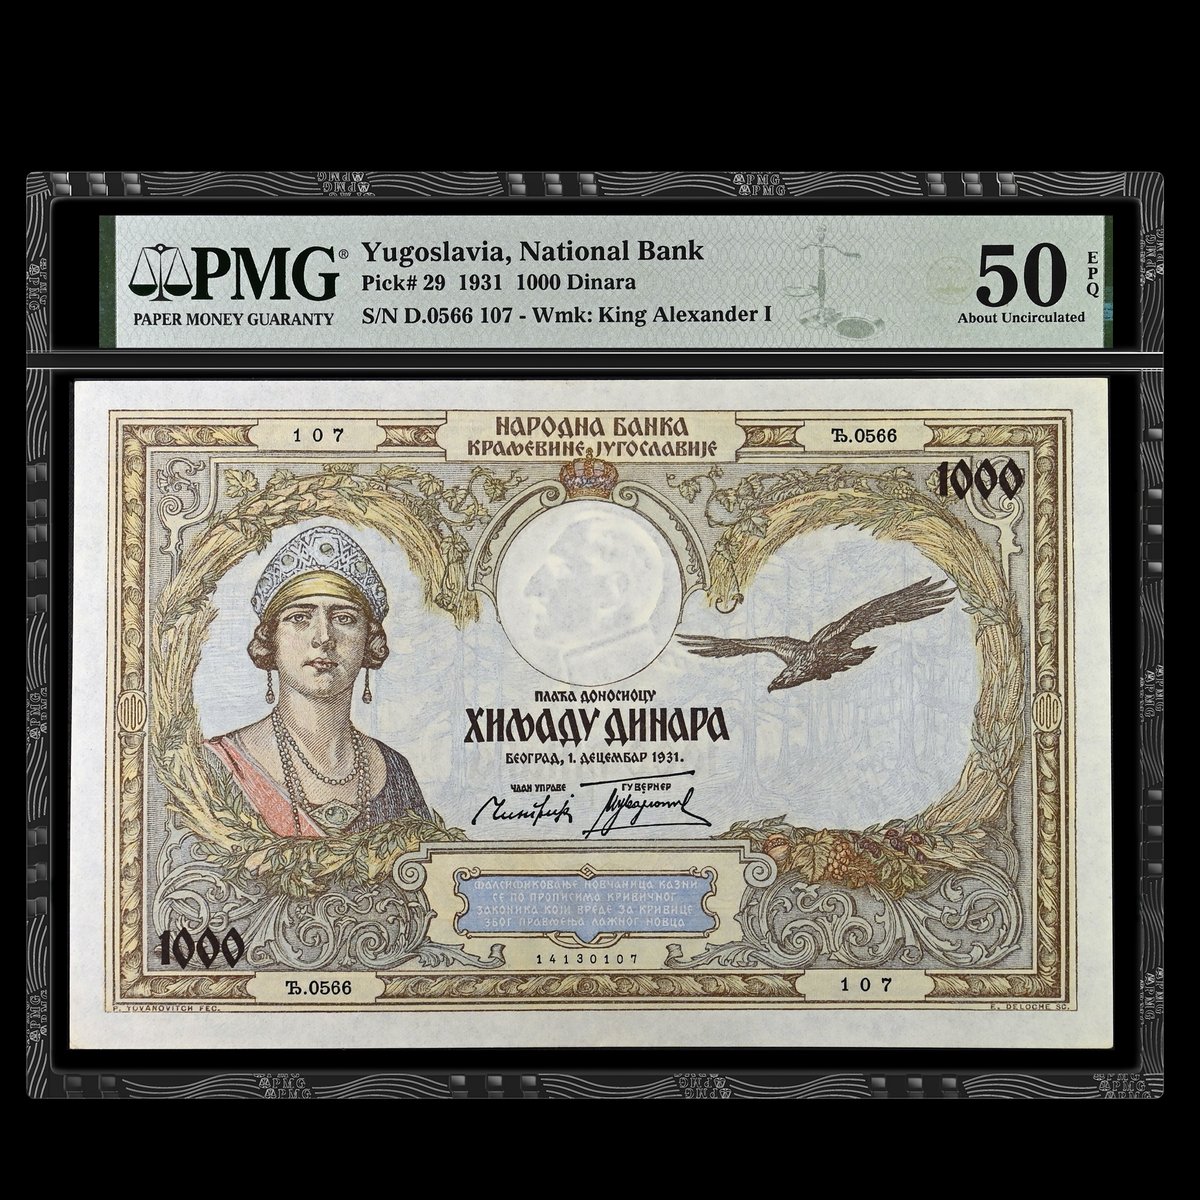 Note of the Day: Our attention this #WomenWednesday is on Maria of Yugoslavia, Queen of the Serbs, Croats and Slovenes from 1922 to 1929 and Queen of Yugoslavia from 1929 to 1934. Maria is depicted on the front of this PMG-certified Yugoslavia, National Bank 1931 1,000 Dinara.